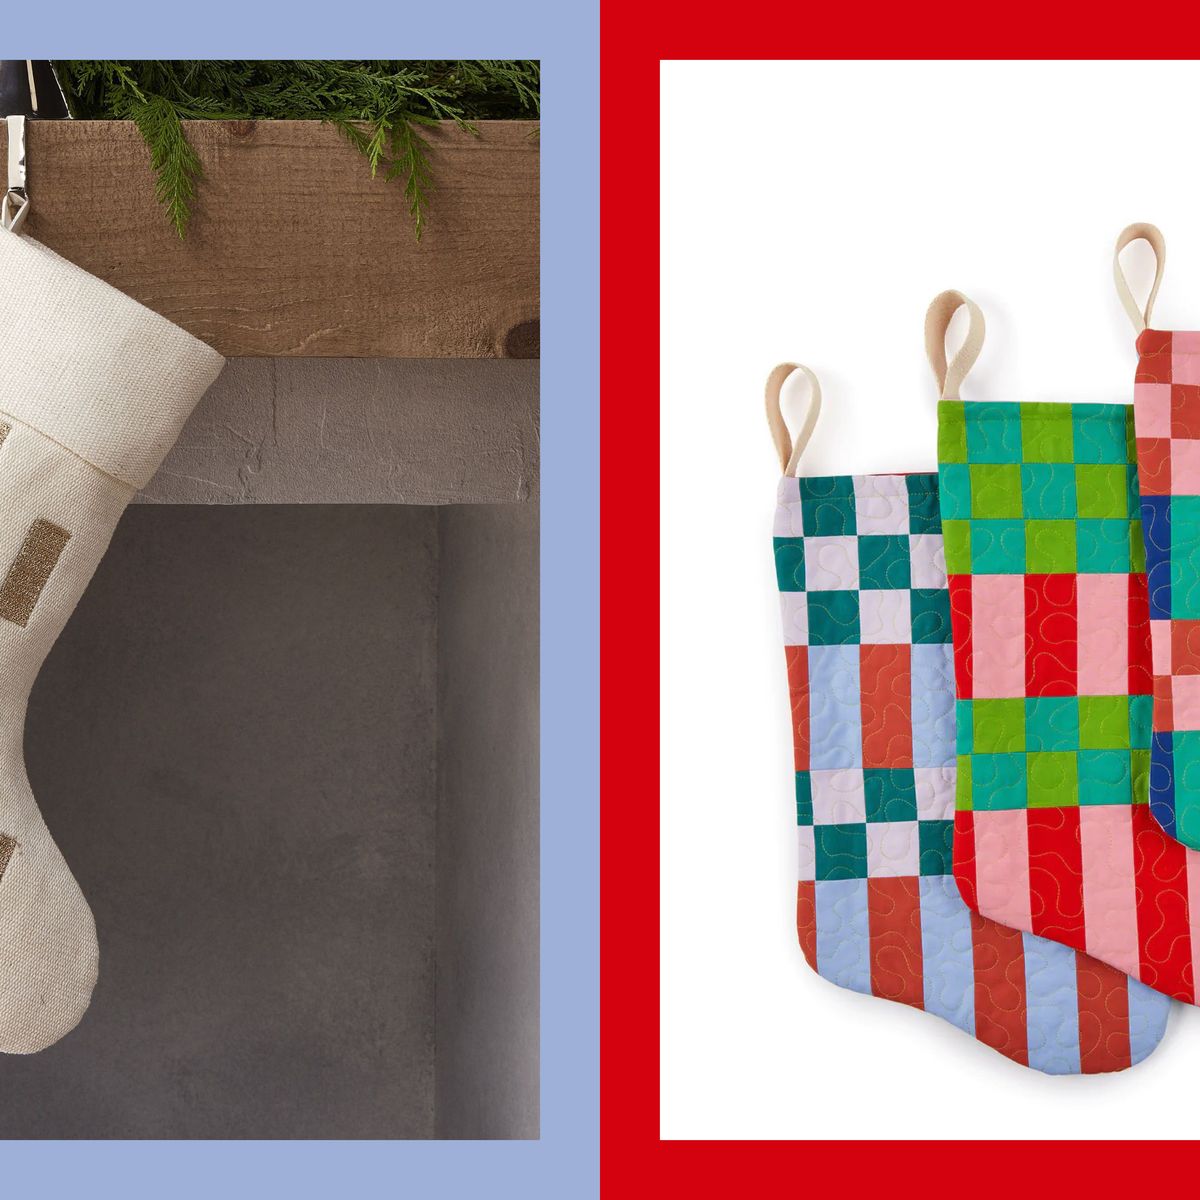 A needlepoint Christmas stocking kit that features red and white